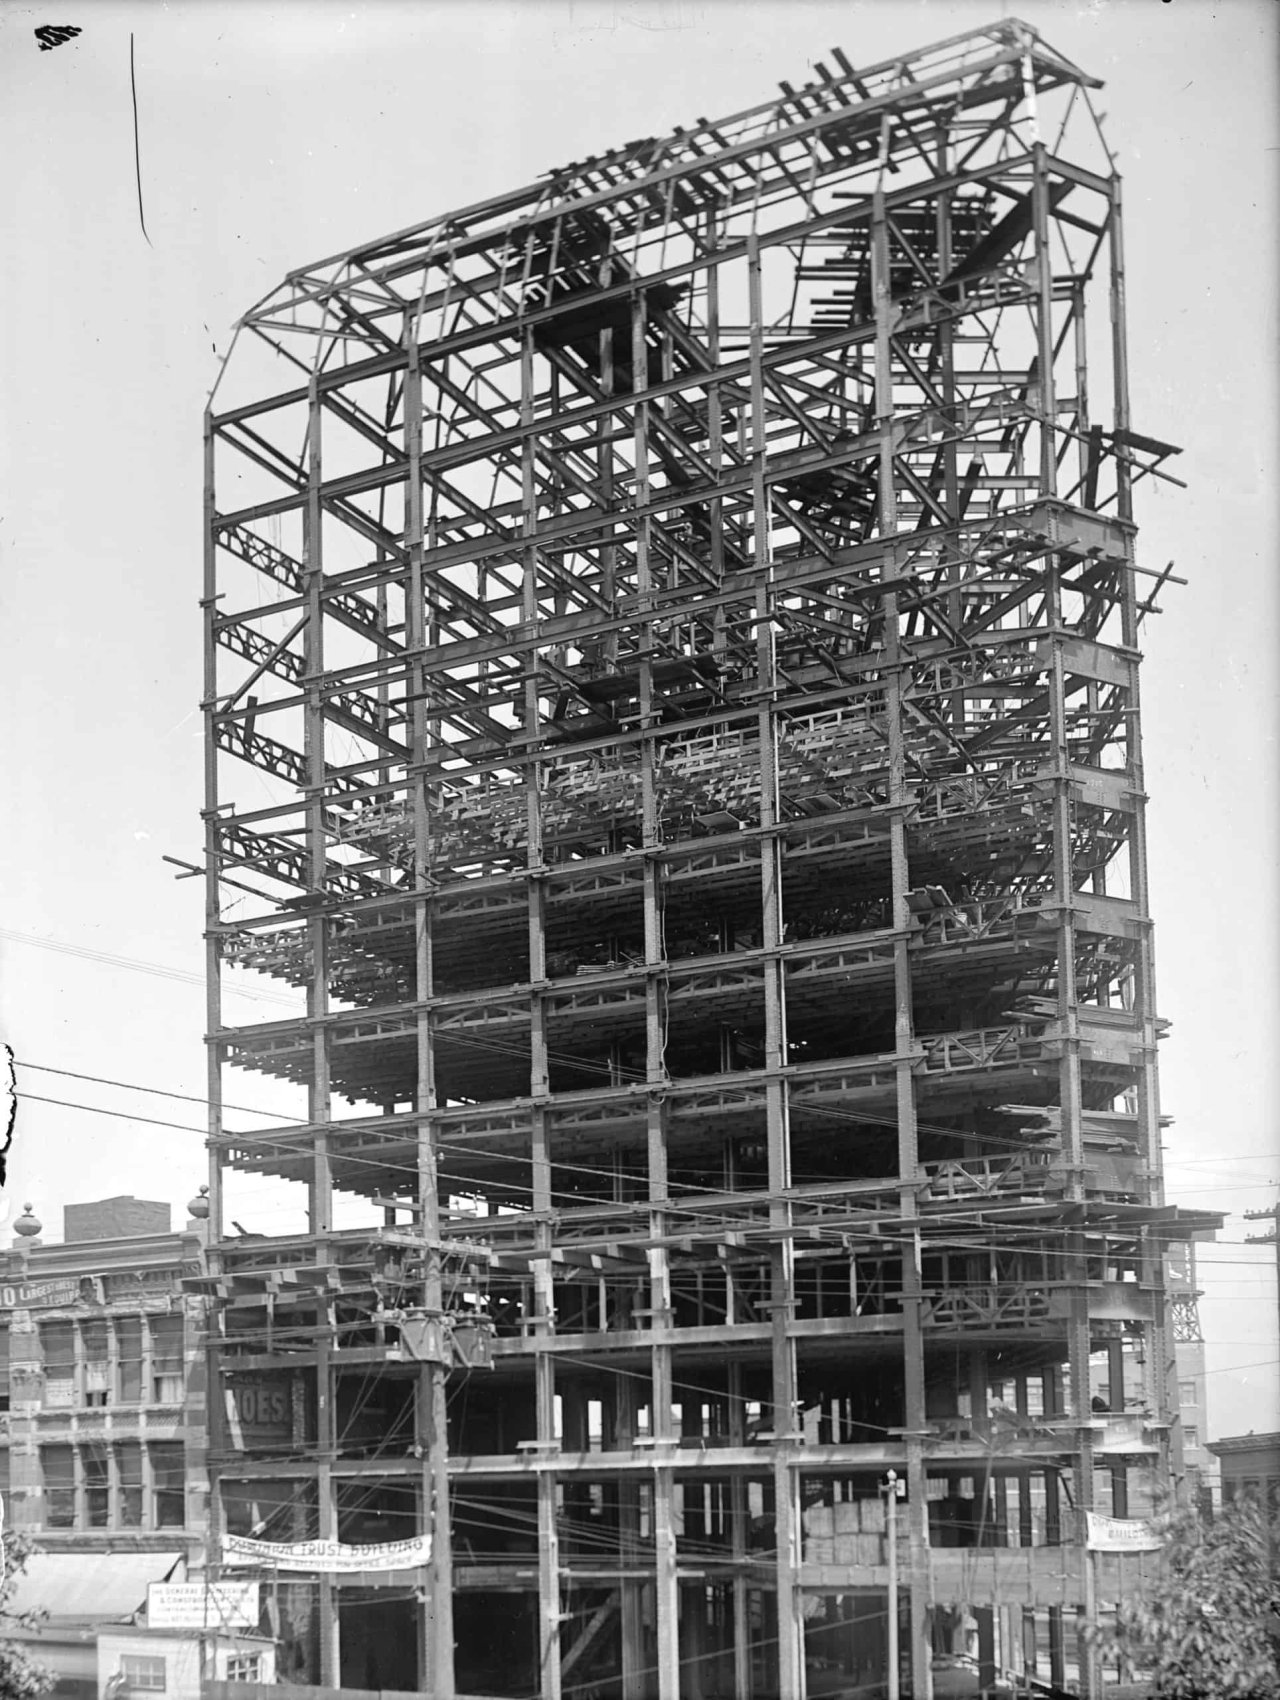 Partially constructed Dominion Building in 1909. City of Vancouver Archives SGN 921.